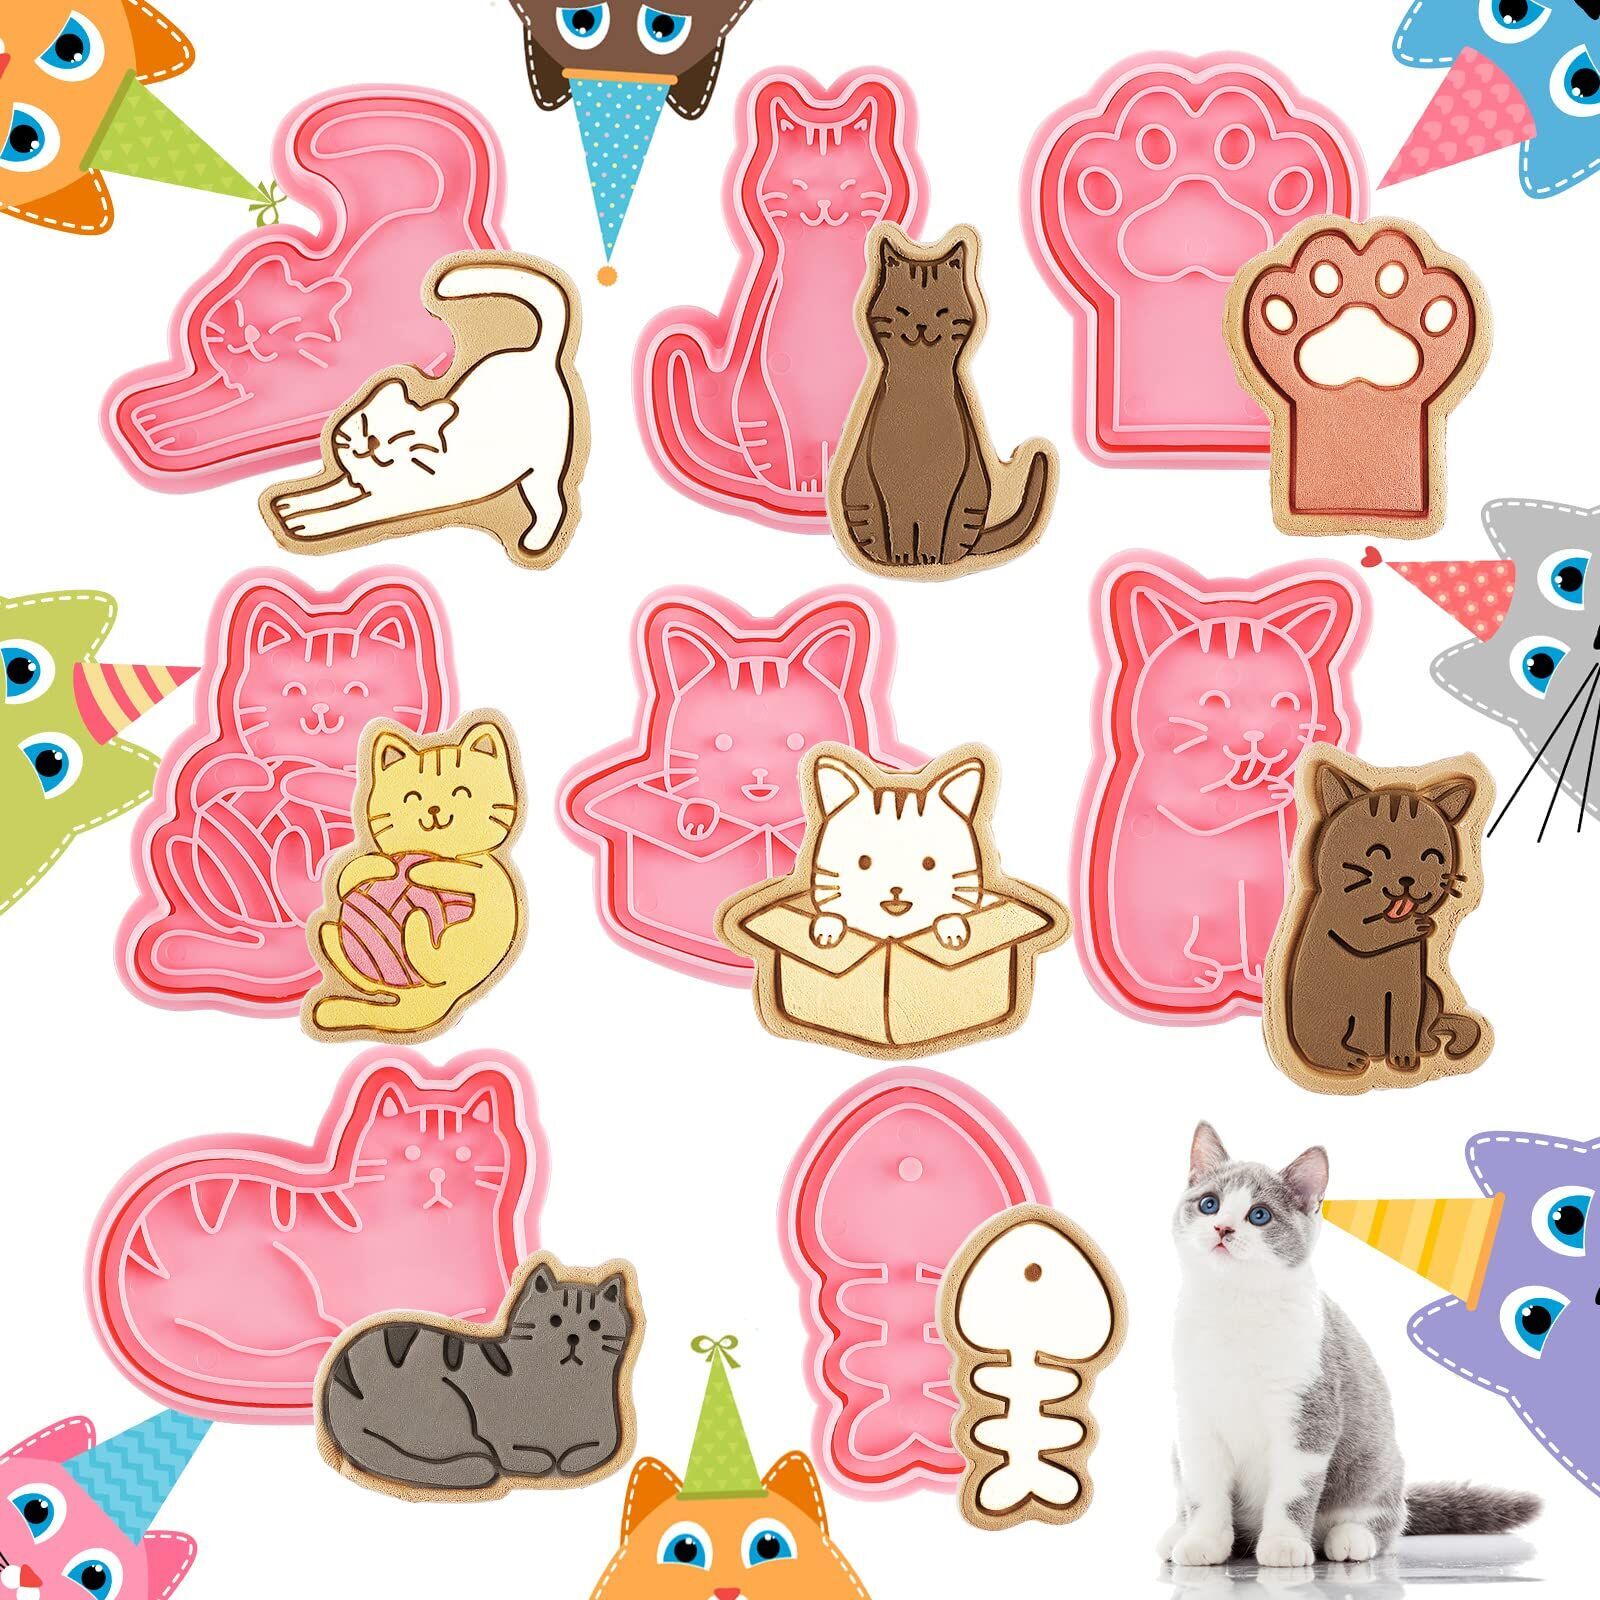 Silicone Gummy Candy Molds, Cartoon Cat Shape Chocolate Molds, Non